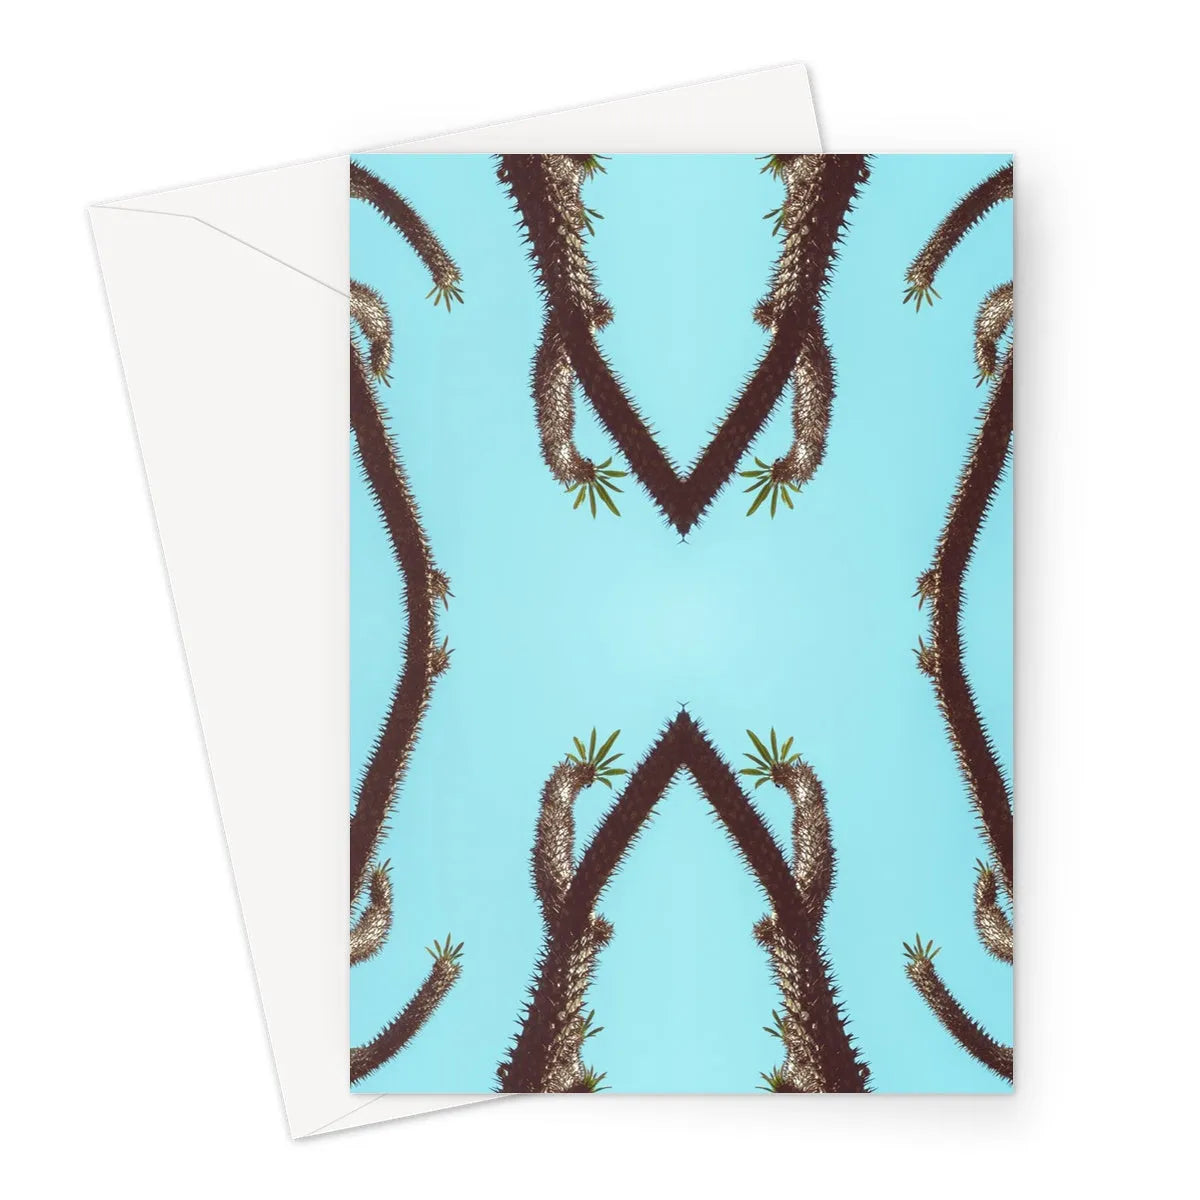 Chain Reaction Greeting Card - Greeting & Note Cards - Aesthetic Art